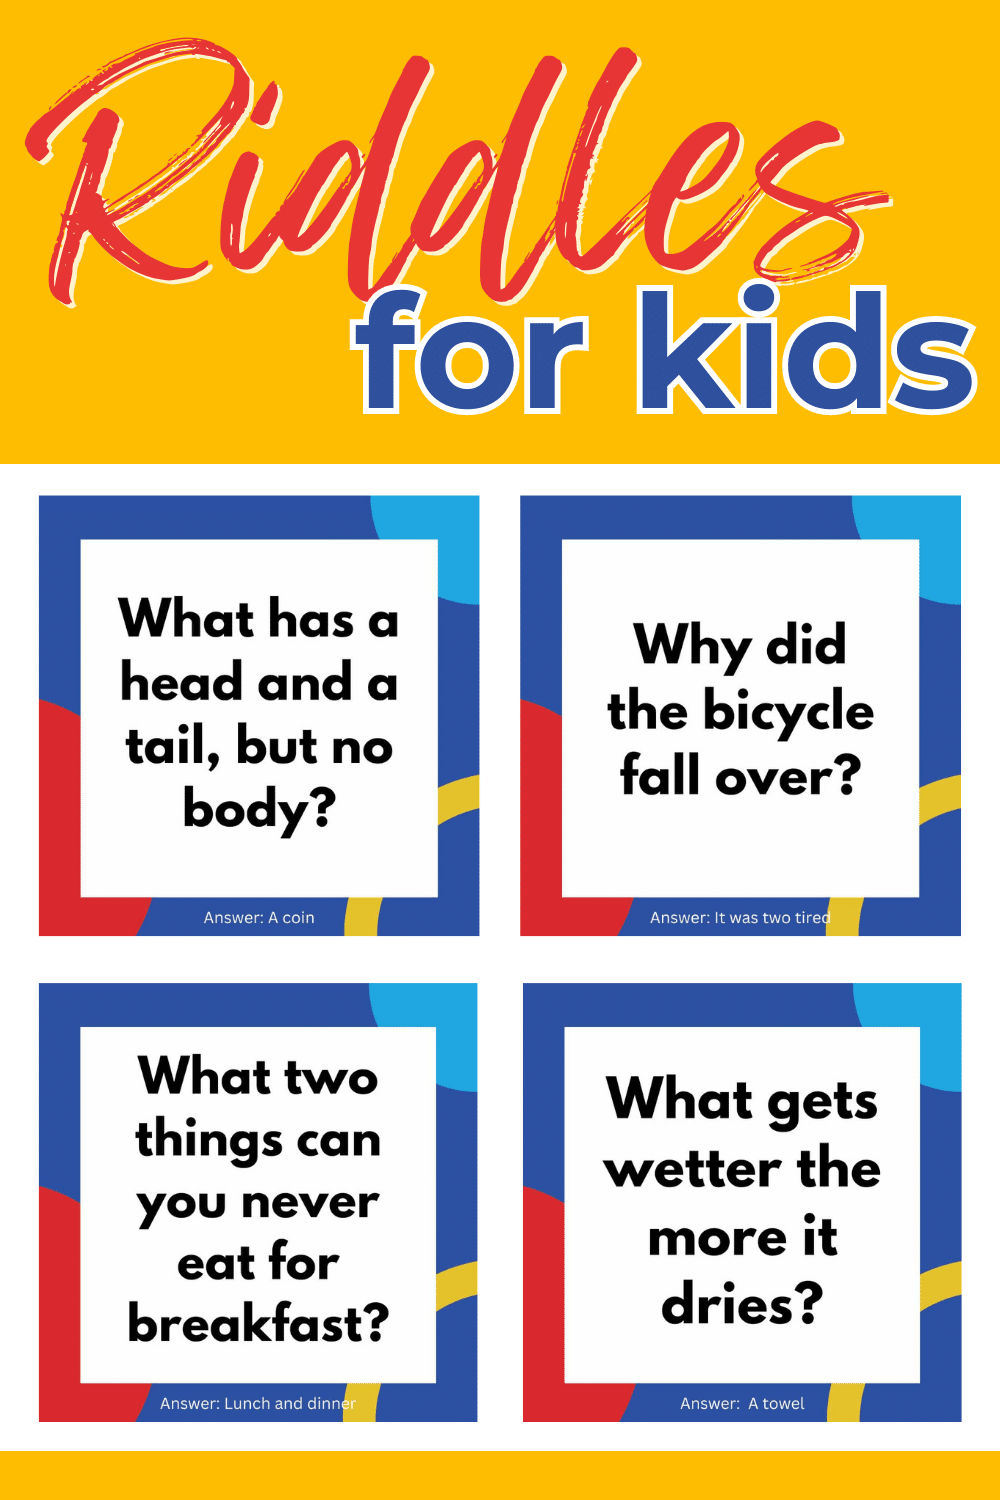 riddles and answers for kids what am i